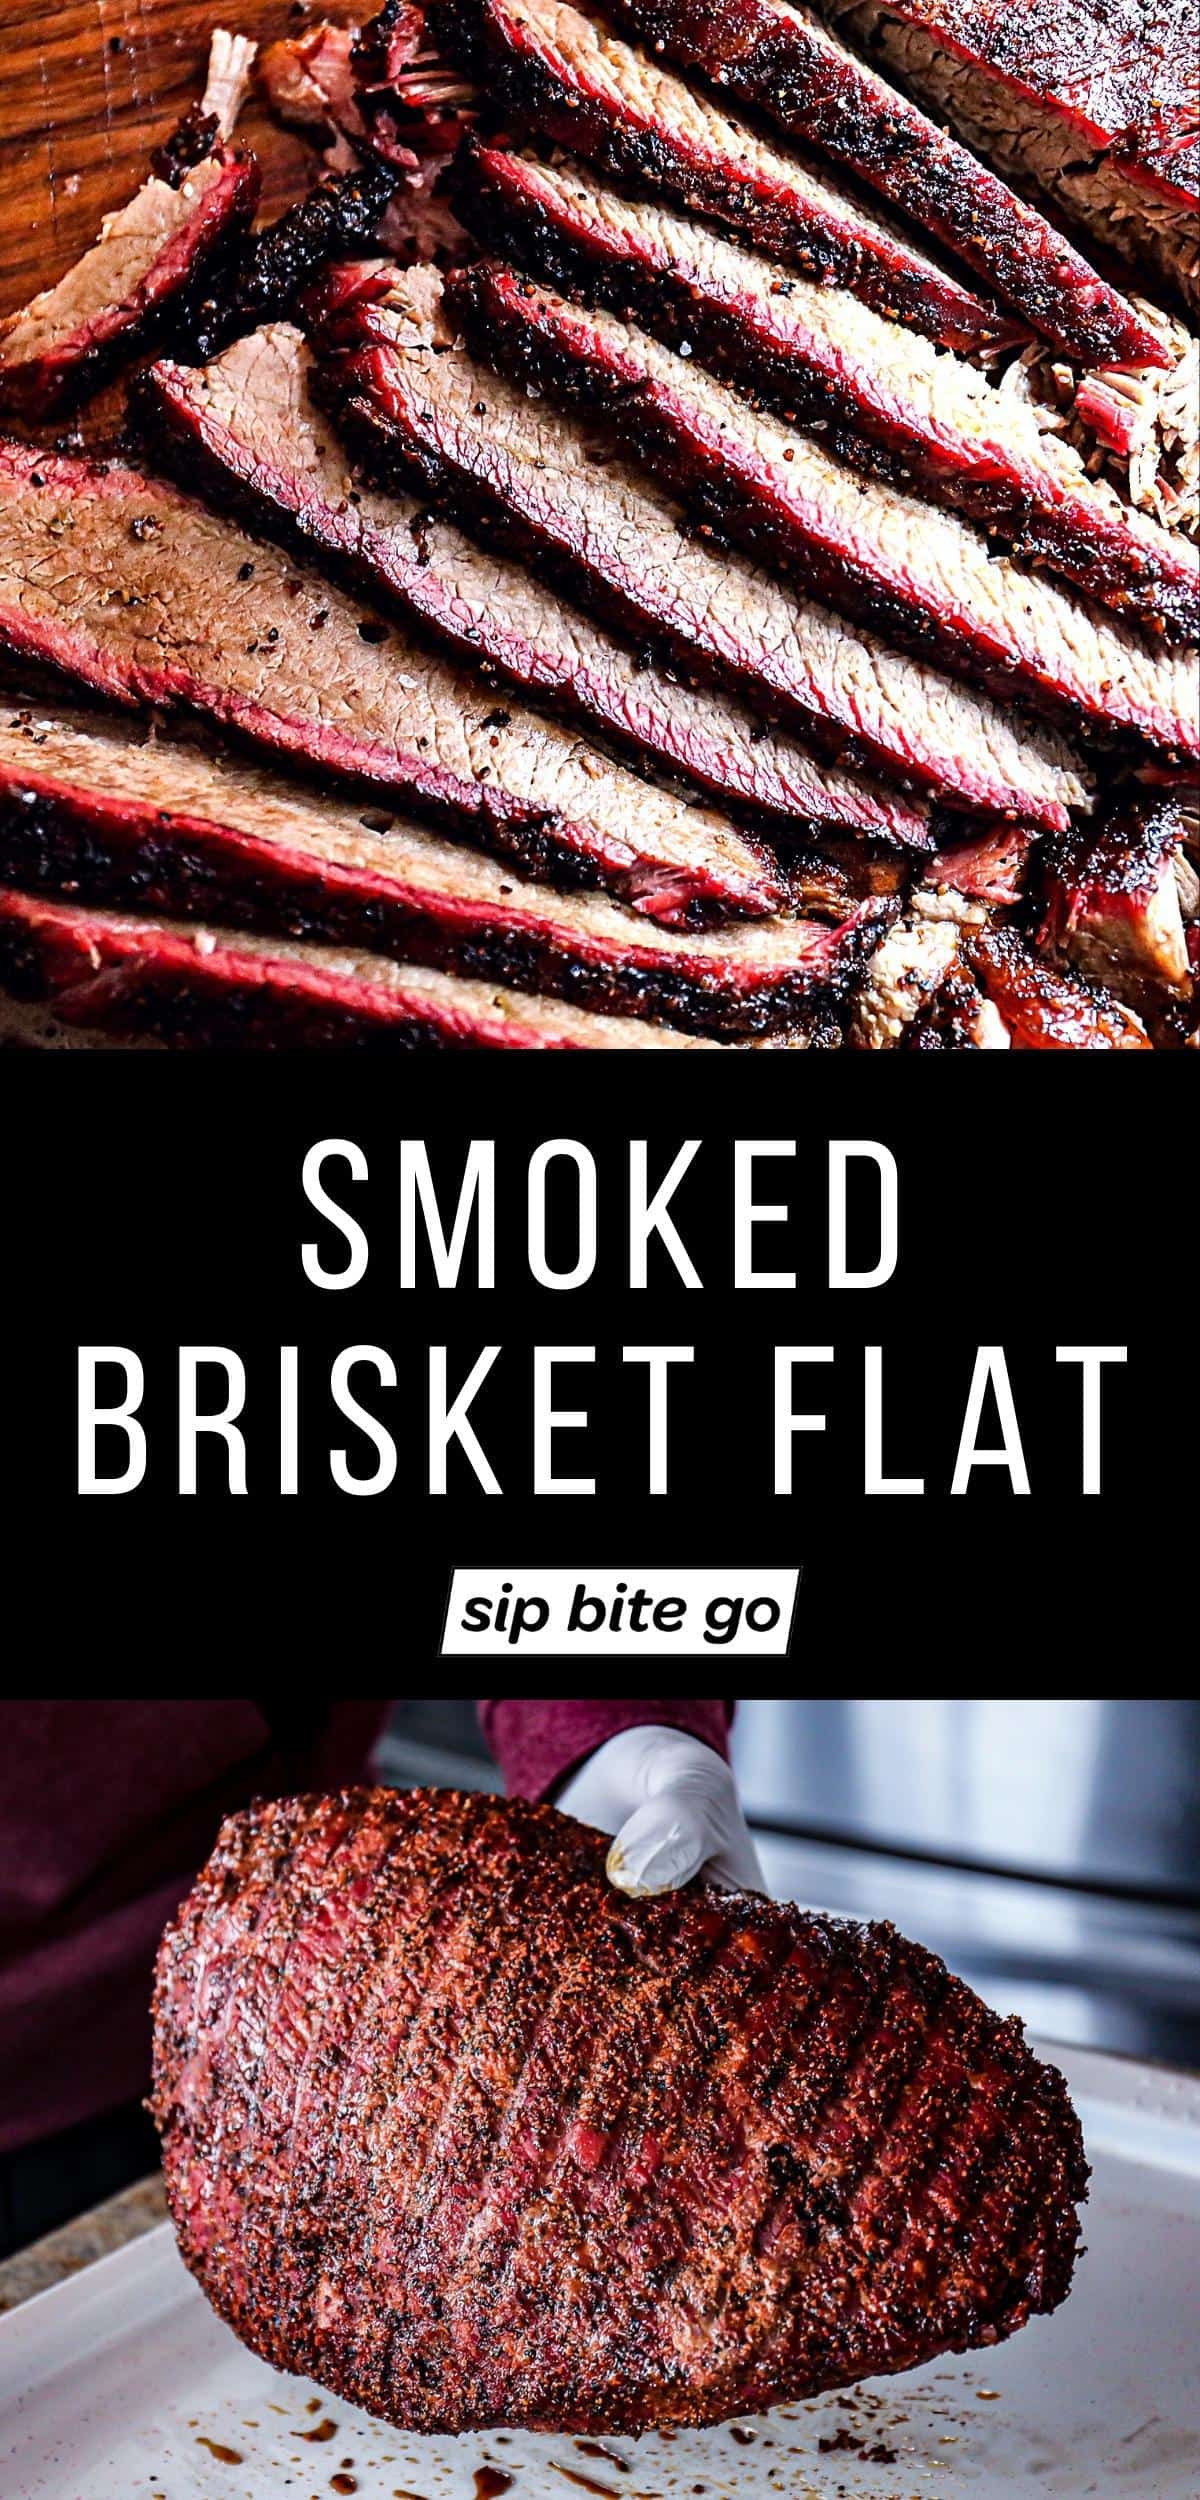 traeger smoked brisket flat recipe images with text overlay